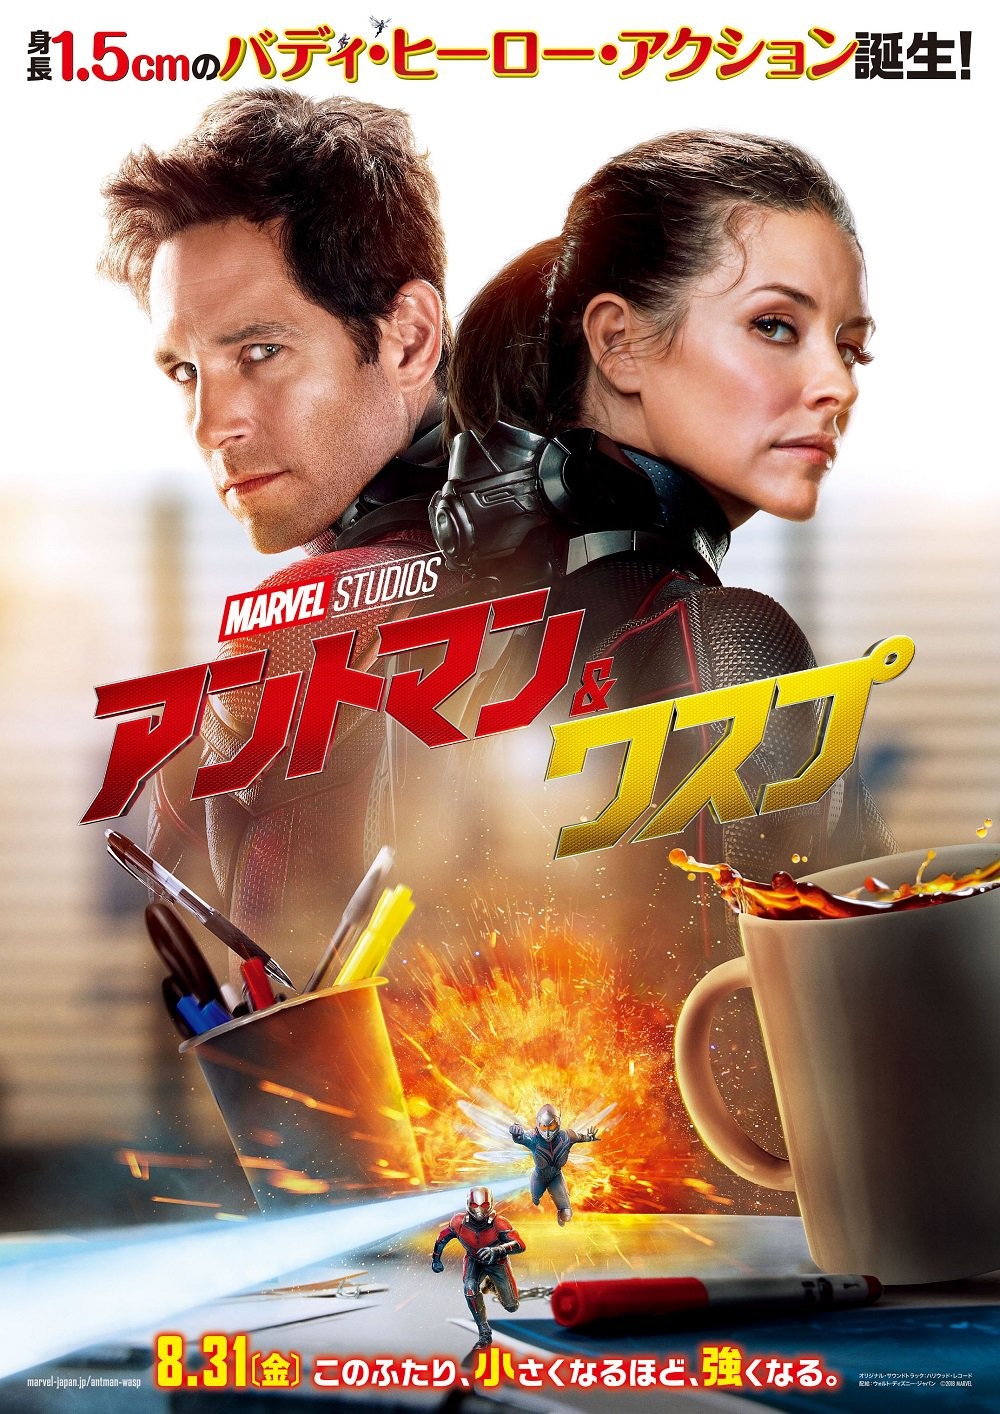 Extra Large Movie Poster Image for Ant-Man and the Wasp (#17 of 18)